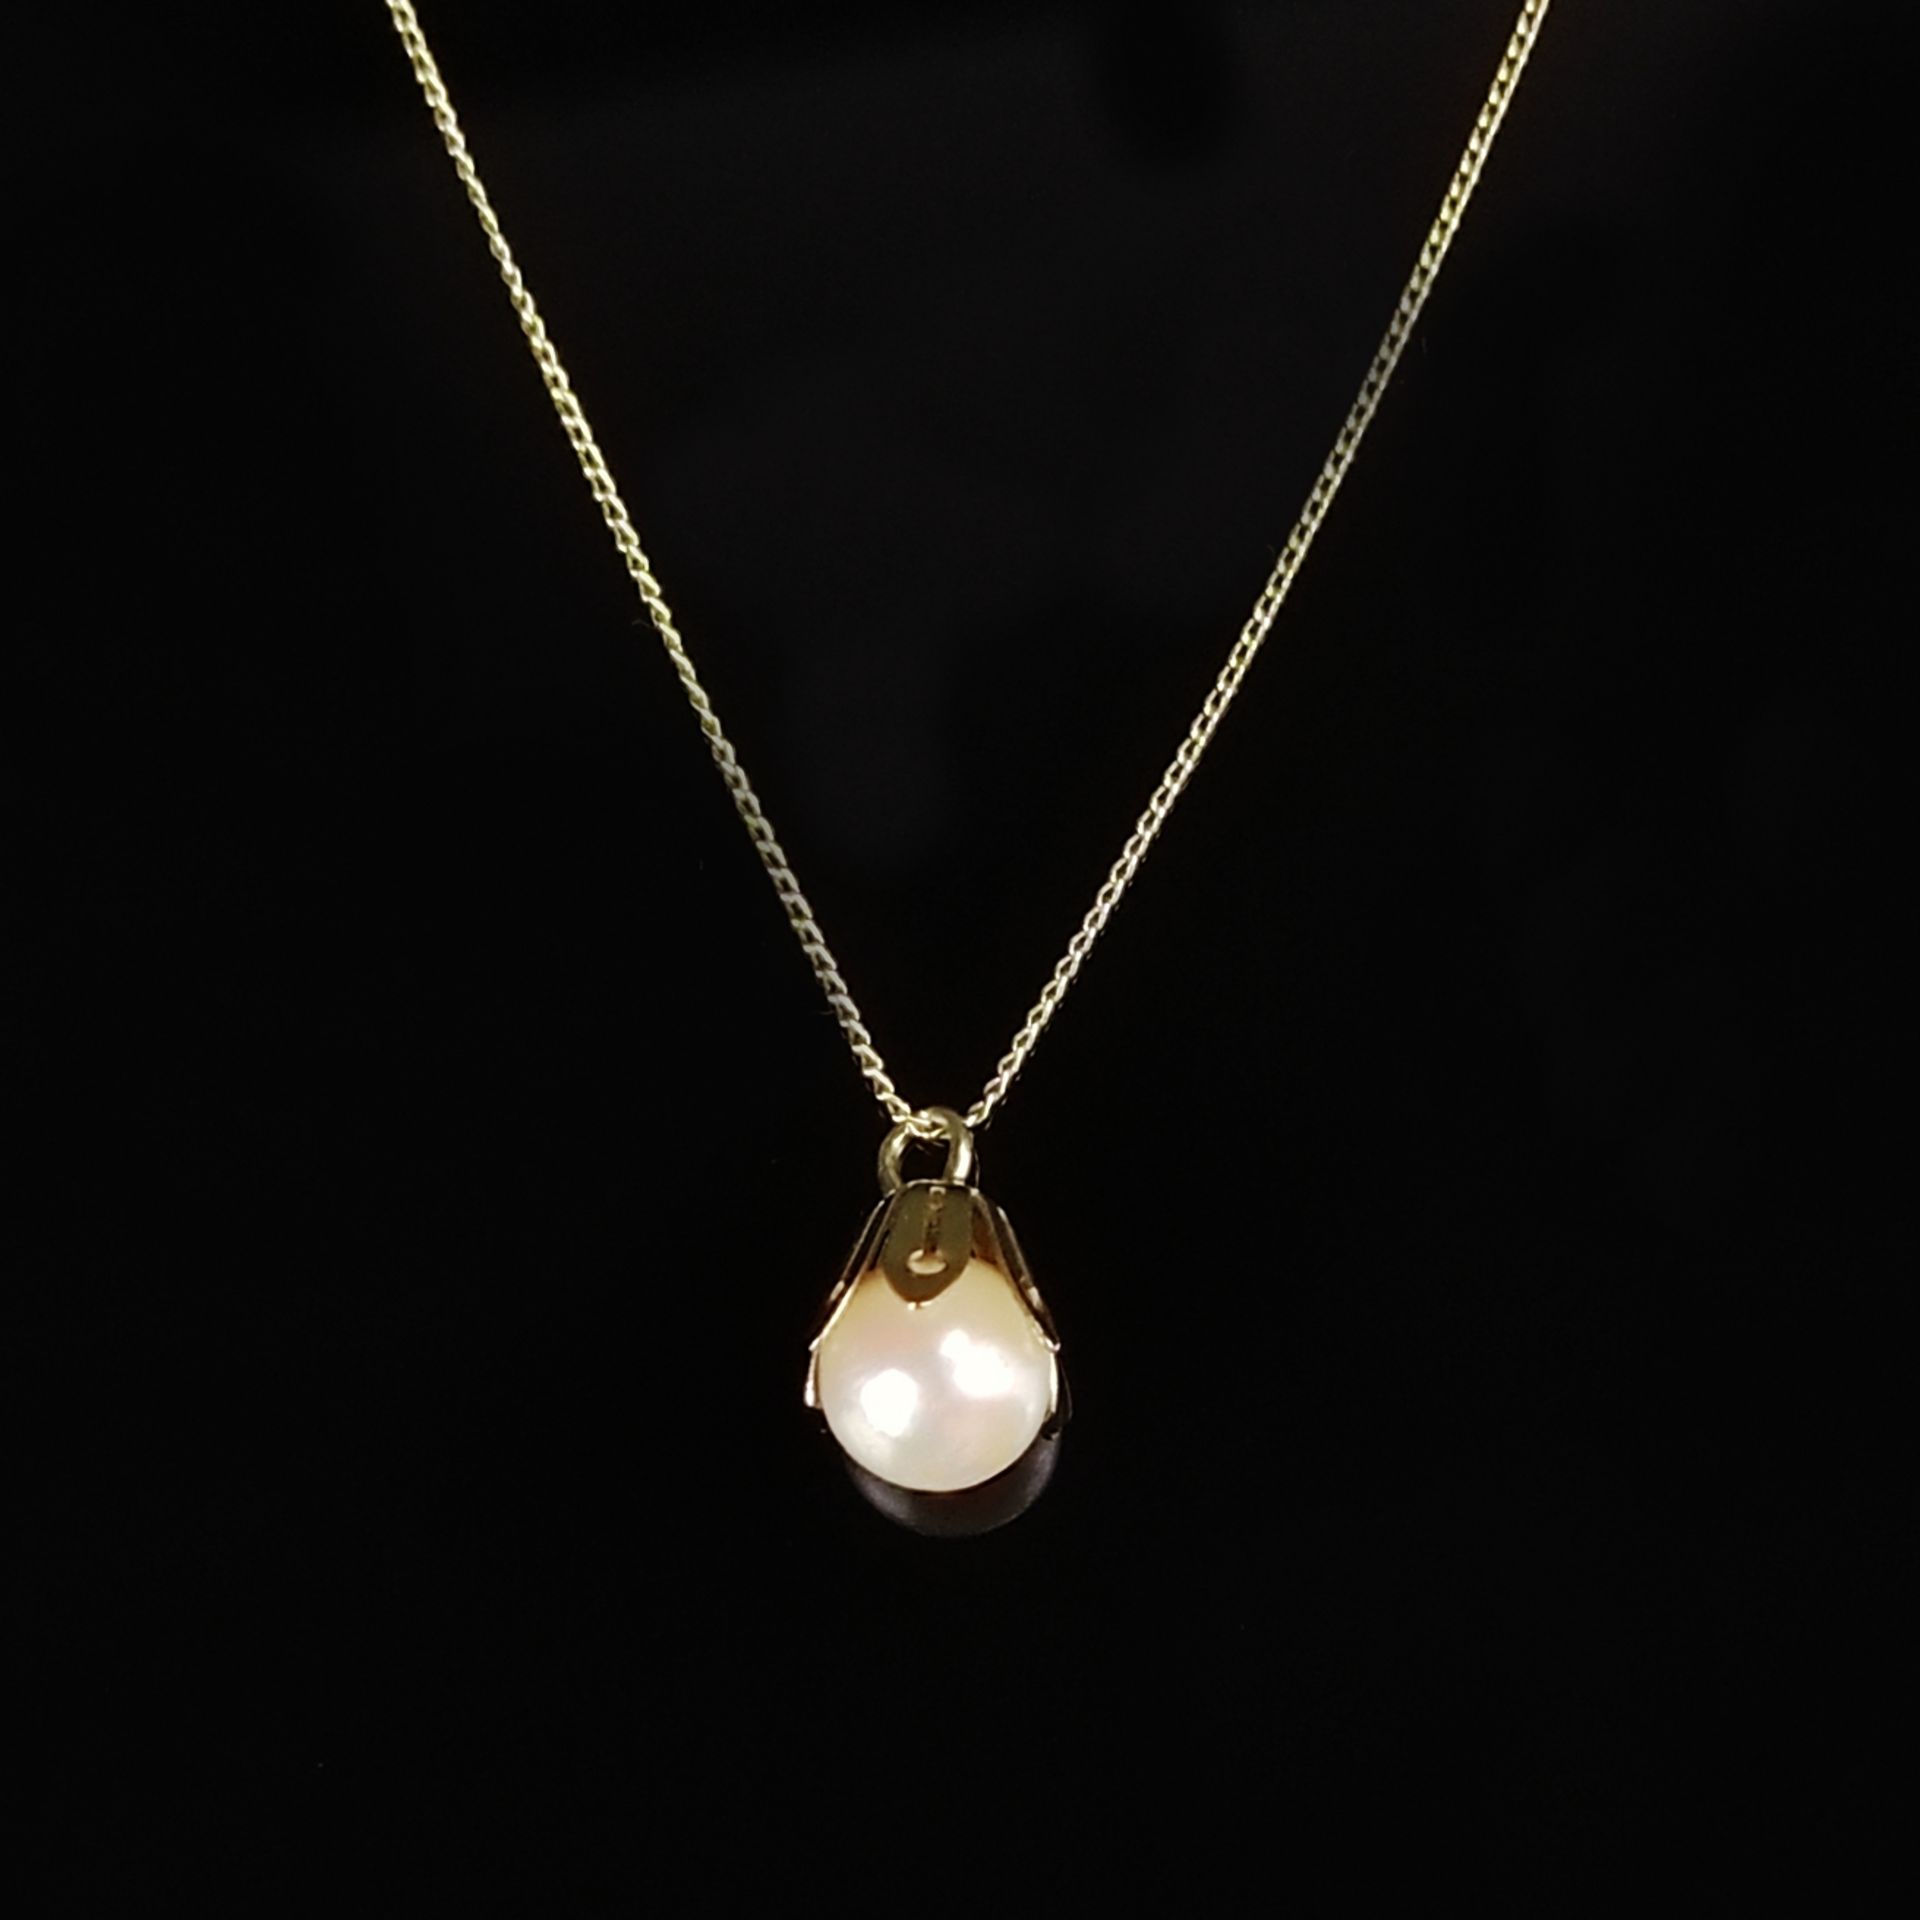 Pearl pendant on fine chain, 585/14K yellow gold (tested and hallmarked), total weight 1.95g, ring 